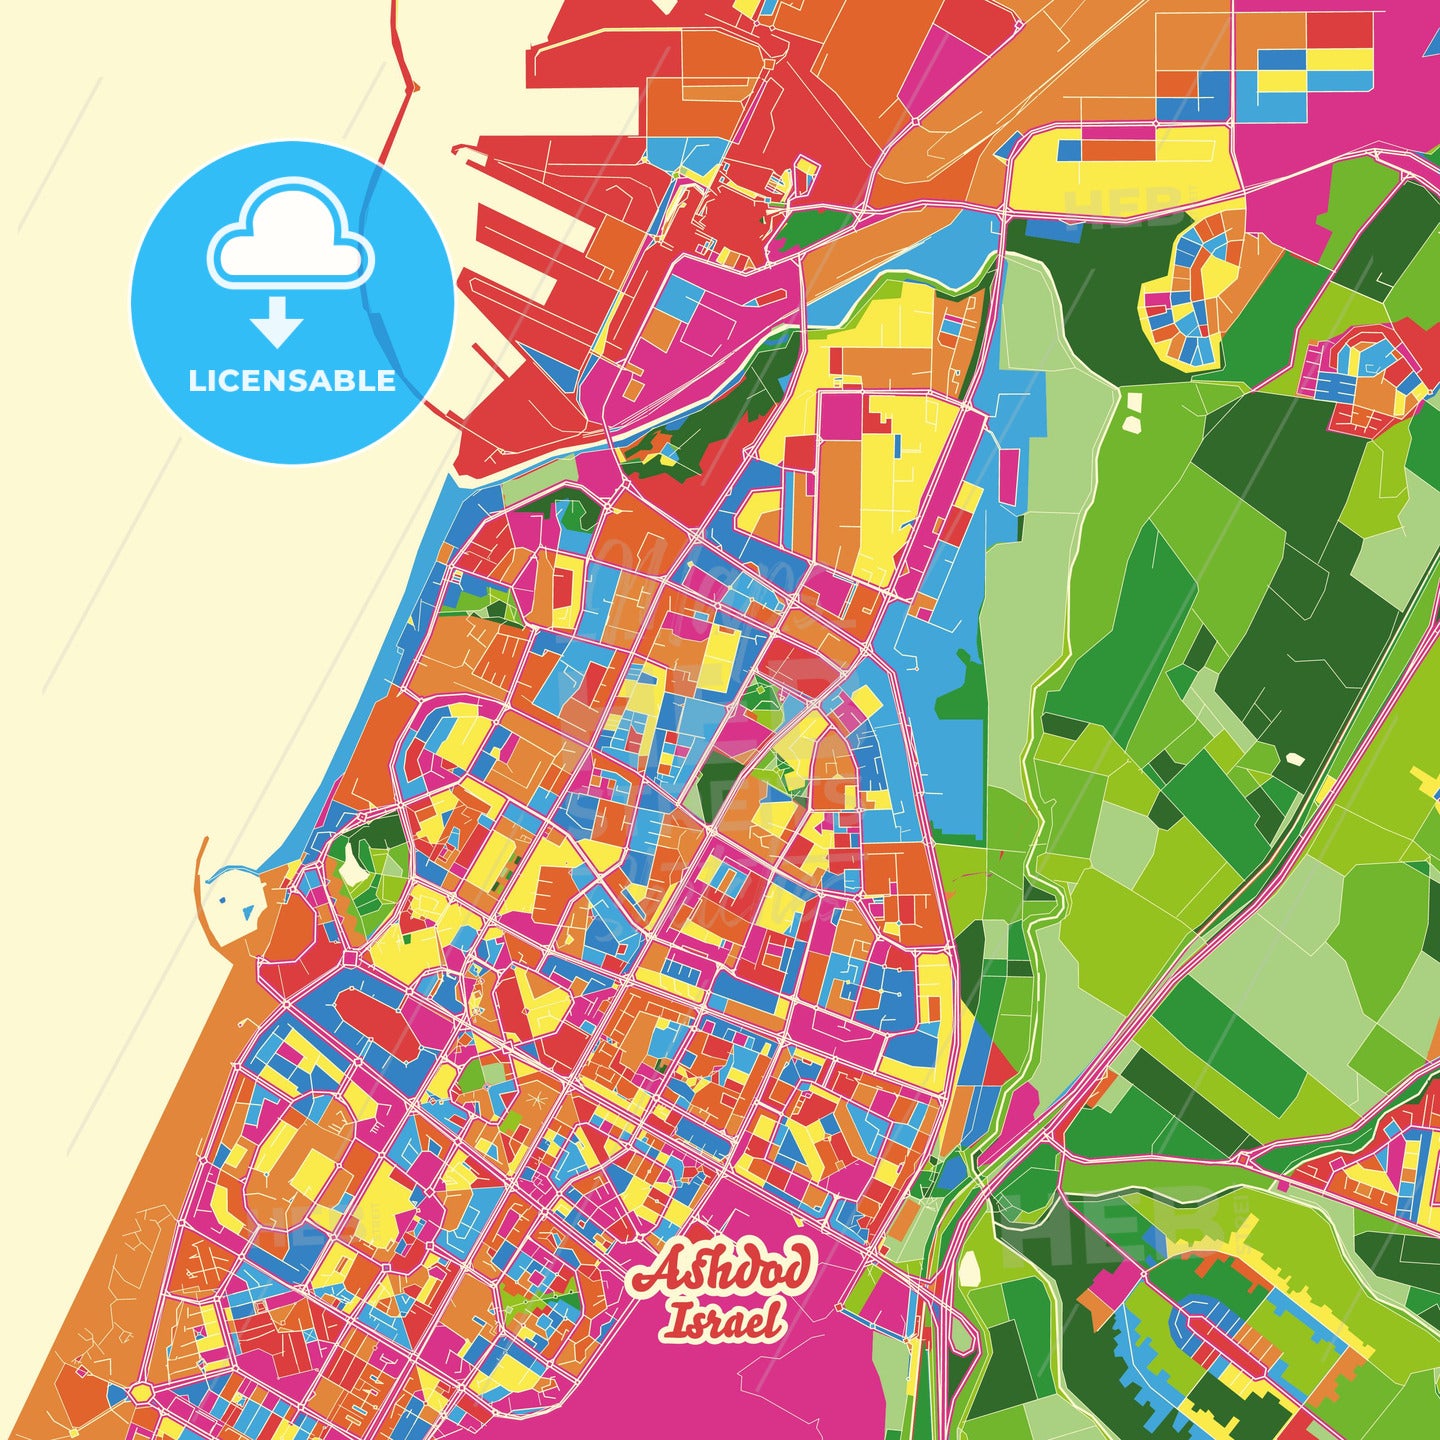 Ashdod, Israel Crazy Colorful Street Map Poster Template - HEBSTREITS Sketches